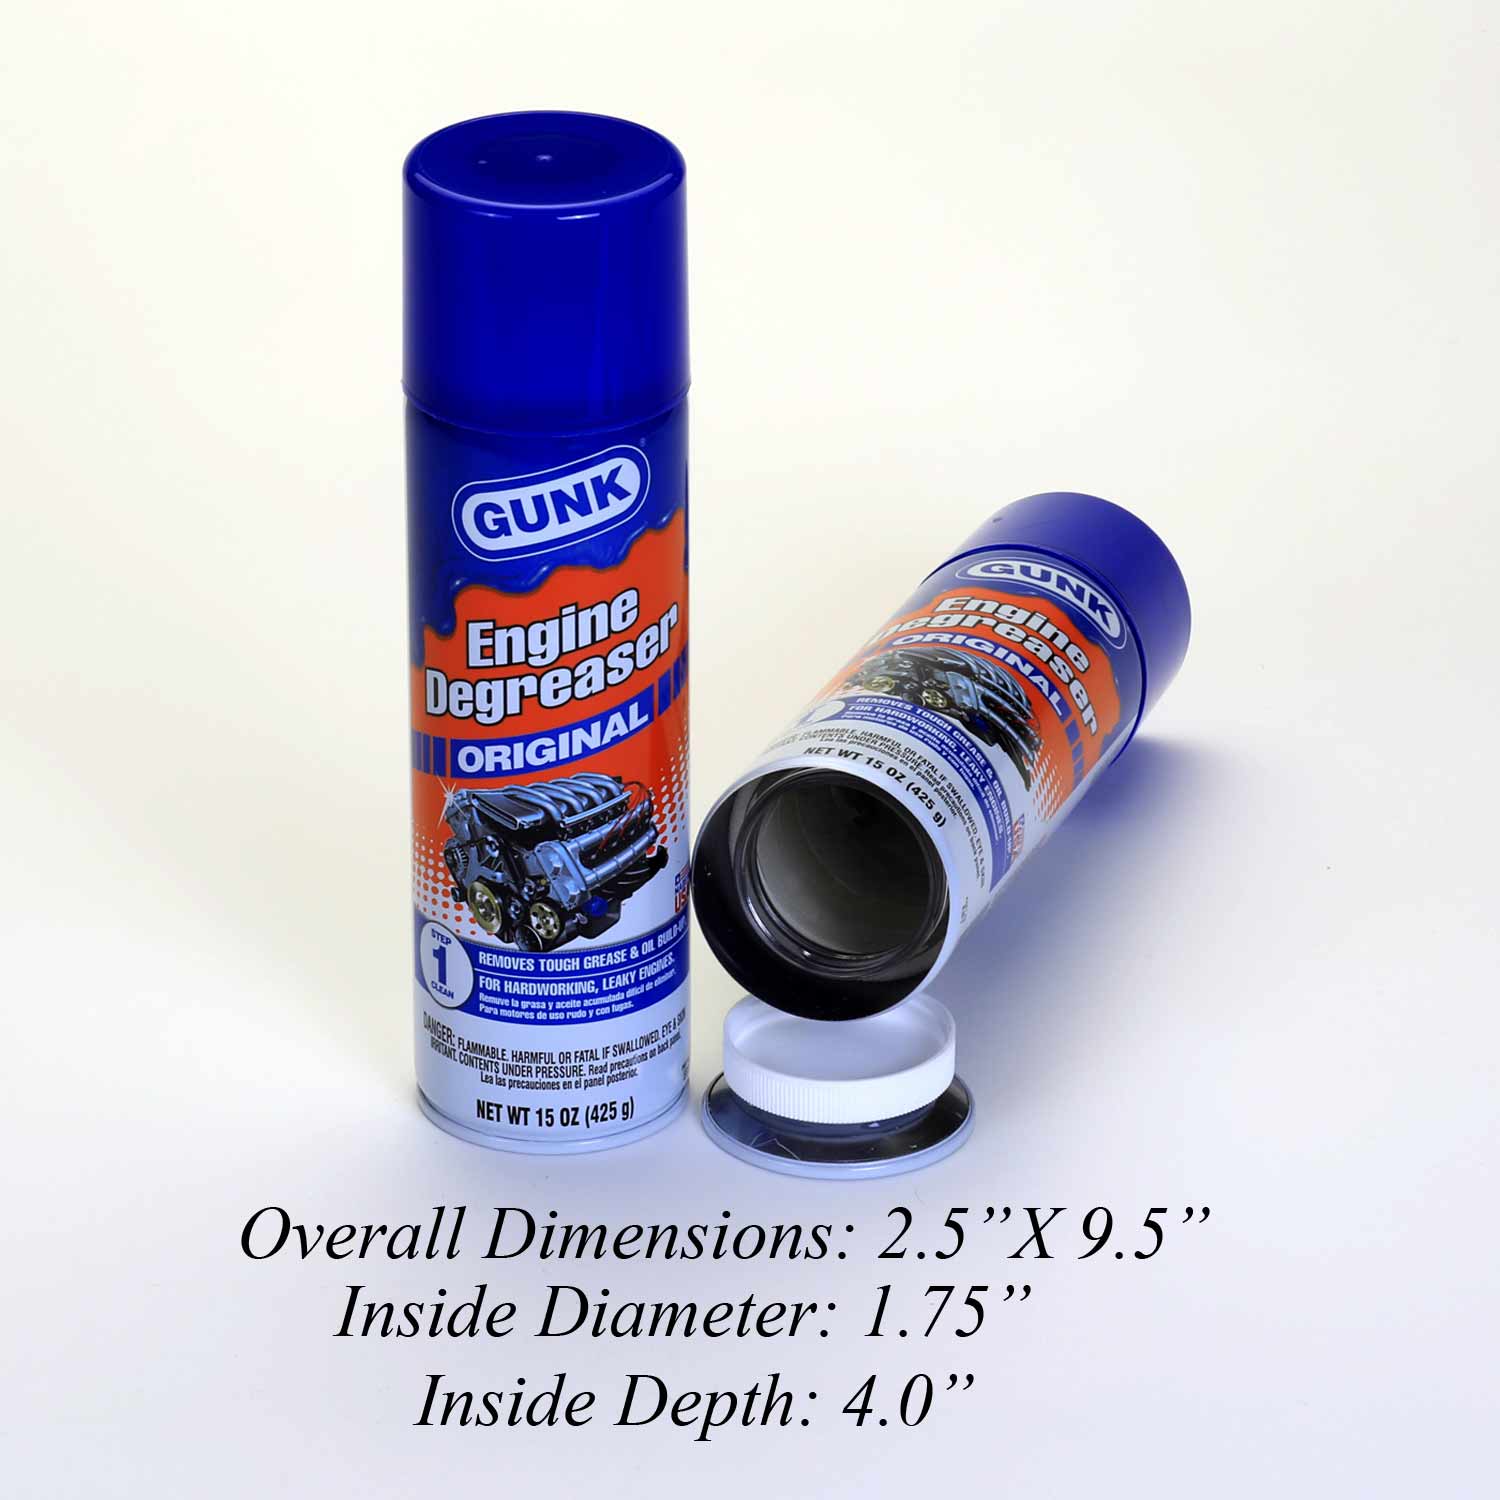 GUNK Engine Brite Degreaser - Diversion Can Safe - Southwest Specialty  Products: Your Home Security and Diversion Can Safe Manufacturing Experts